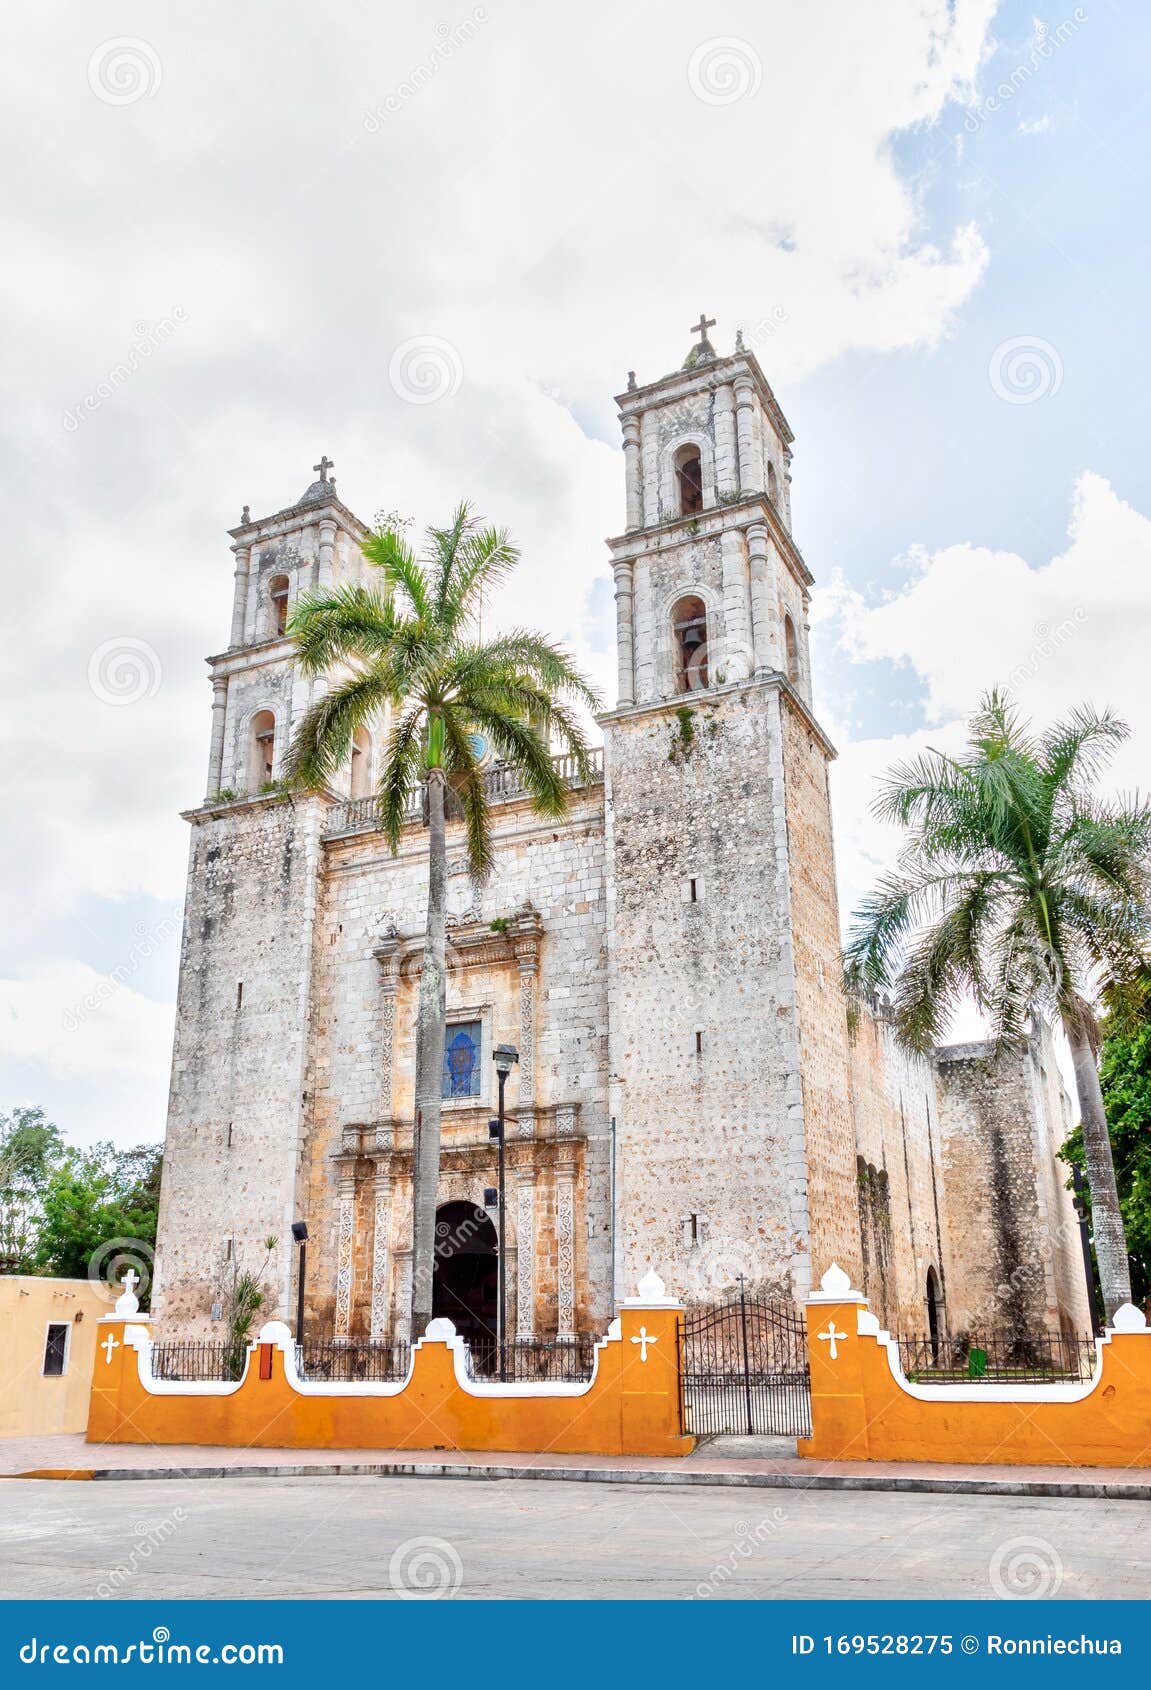 centuries-old historic cathedral of san gervasio church in valladolid, mexico